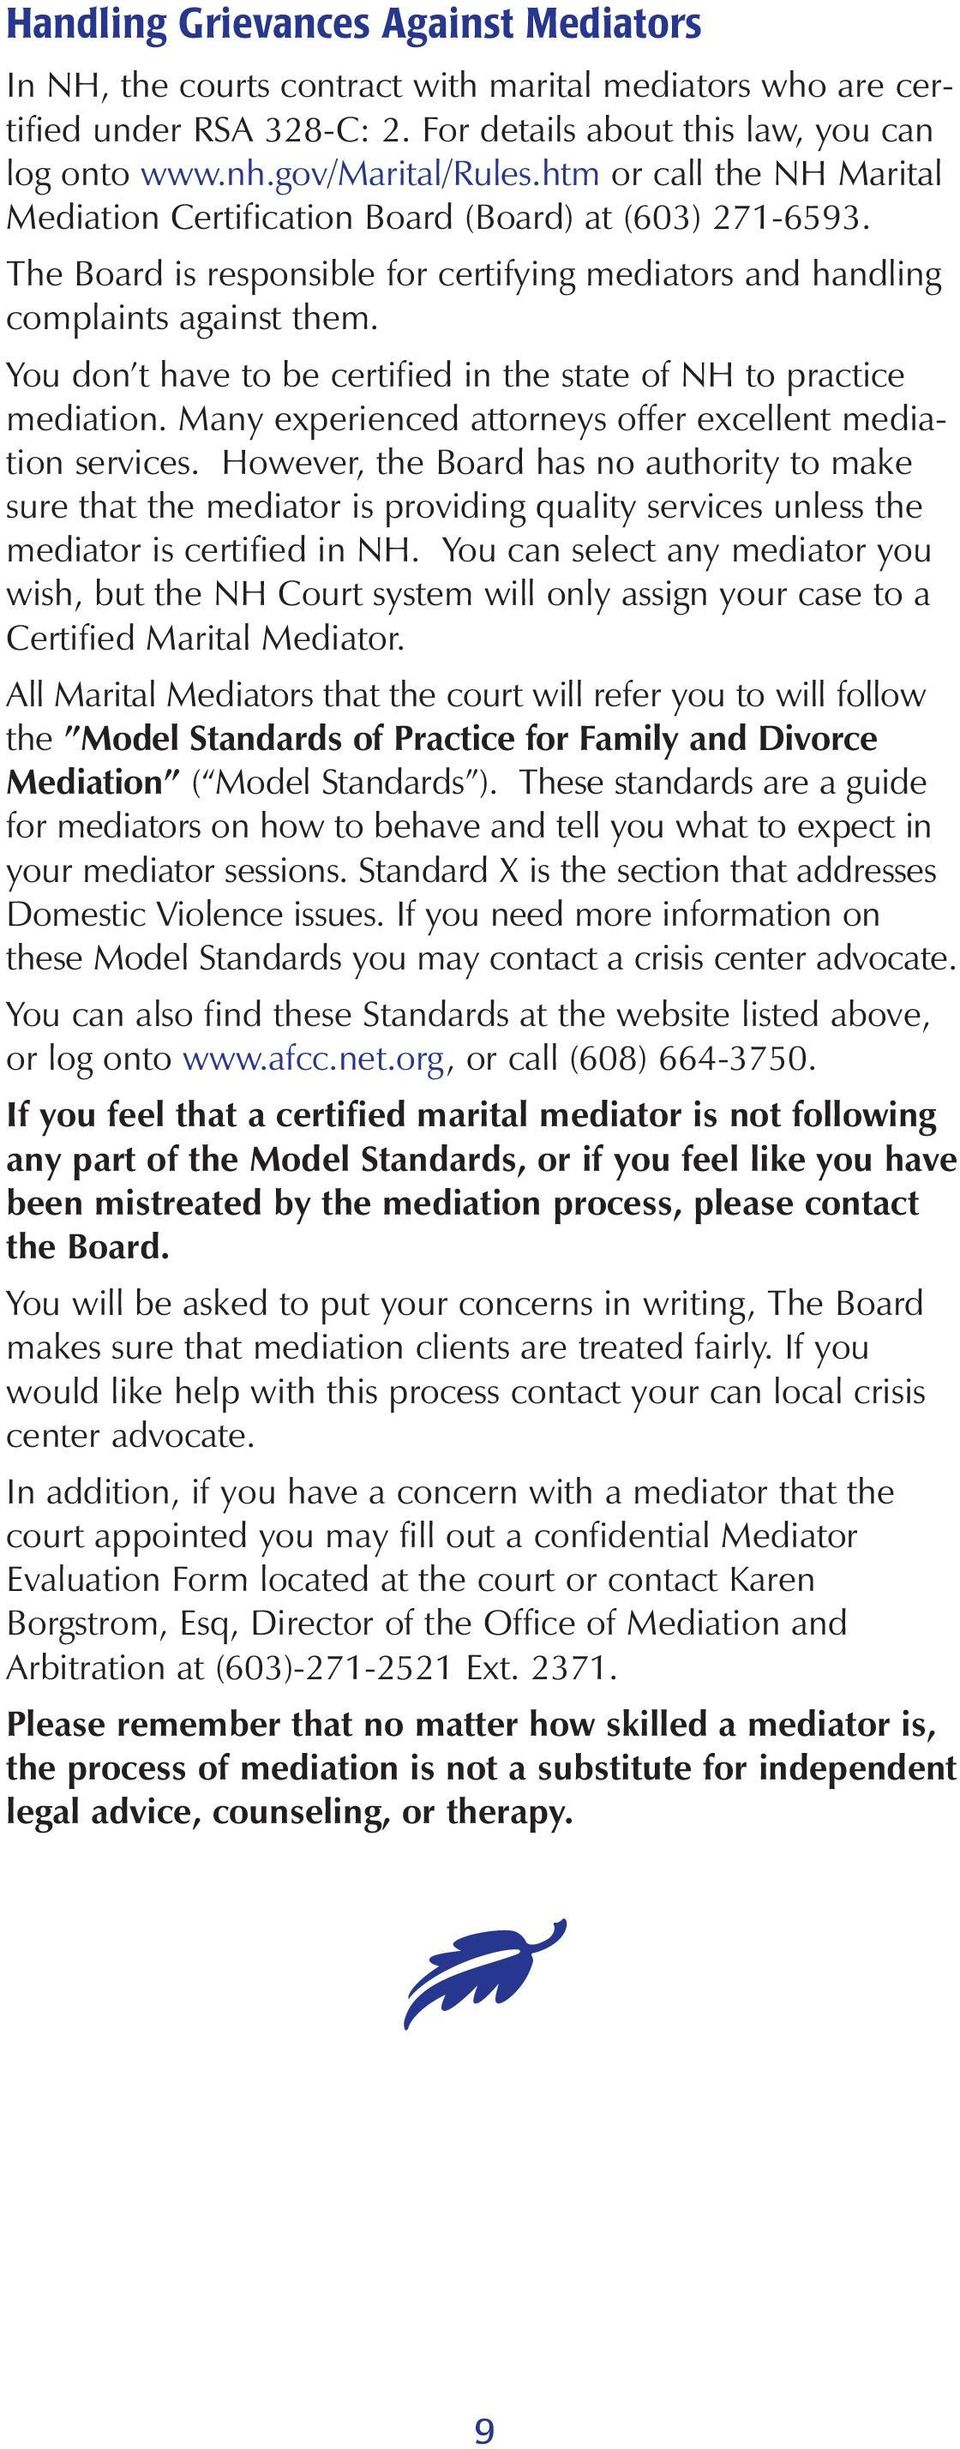 You don t have to be certified in the state of NH to practice mediation. Many experienced attorneys offer excellent mediation services.